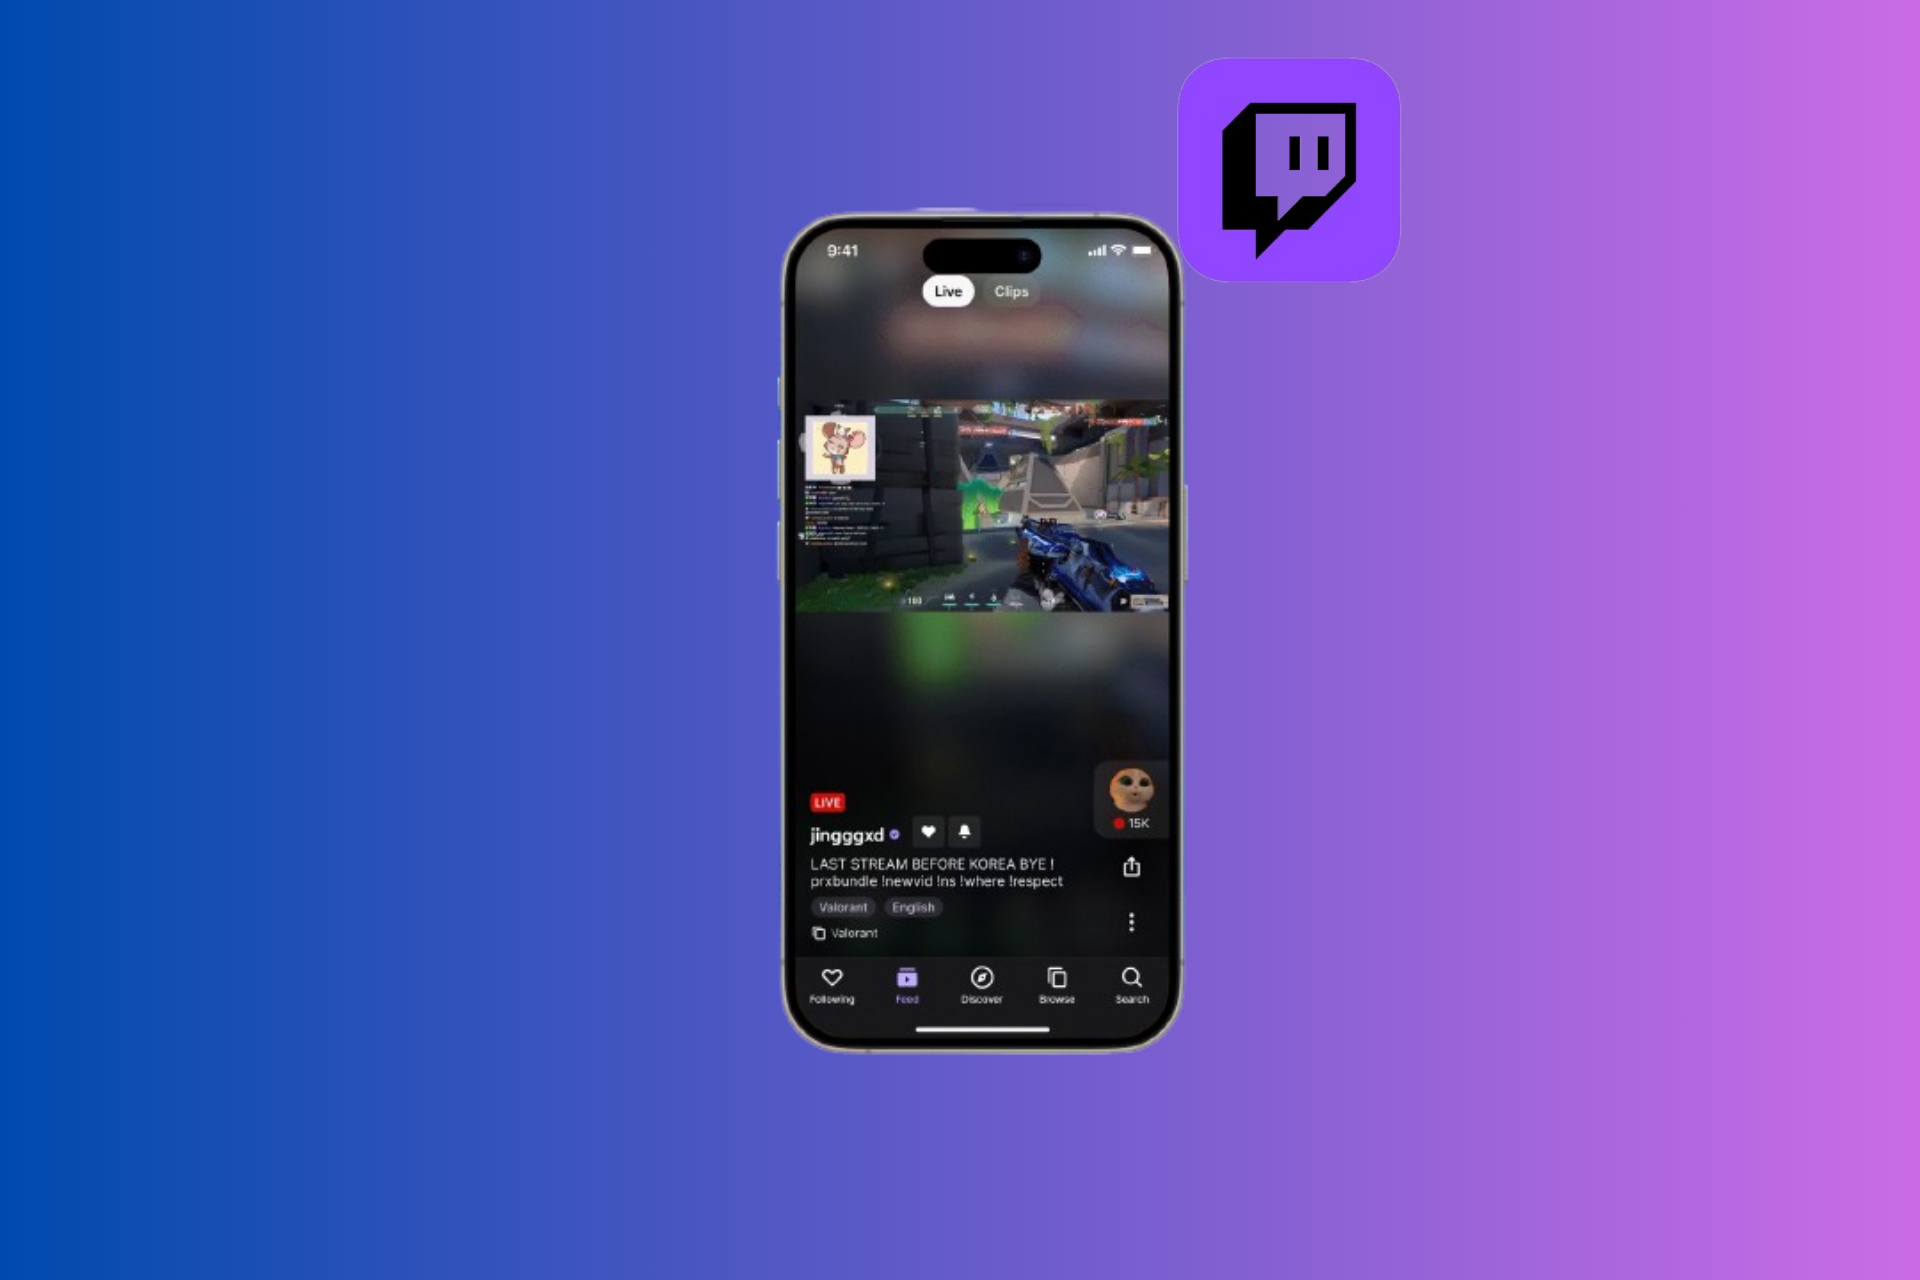 Twitch will soon have a Discovery Feed feature on Android and iOS